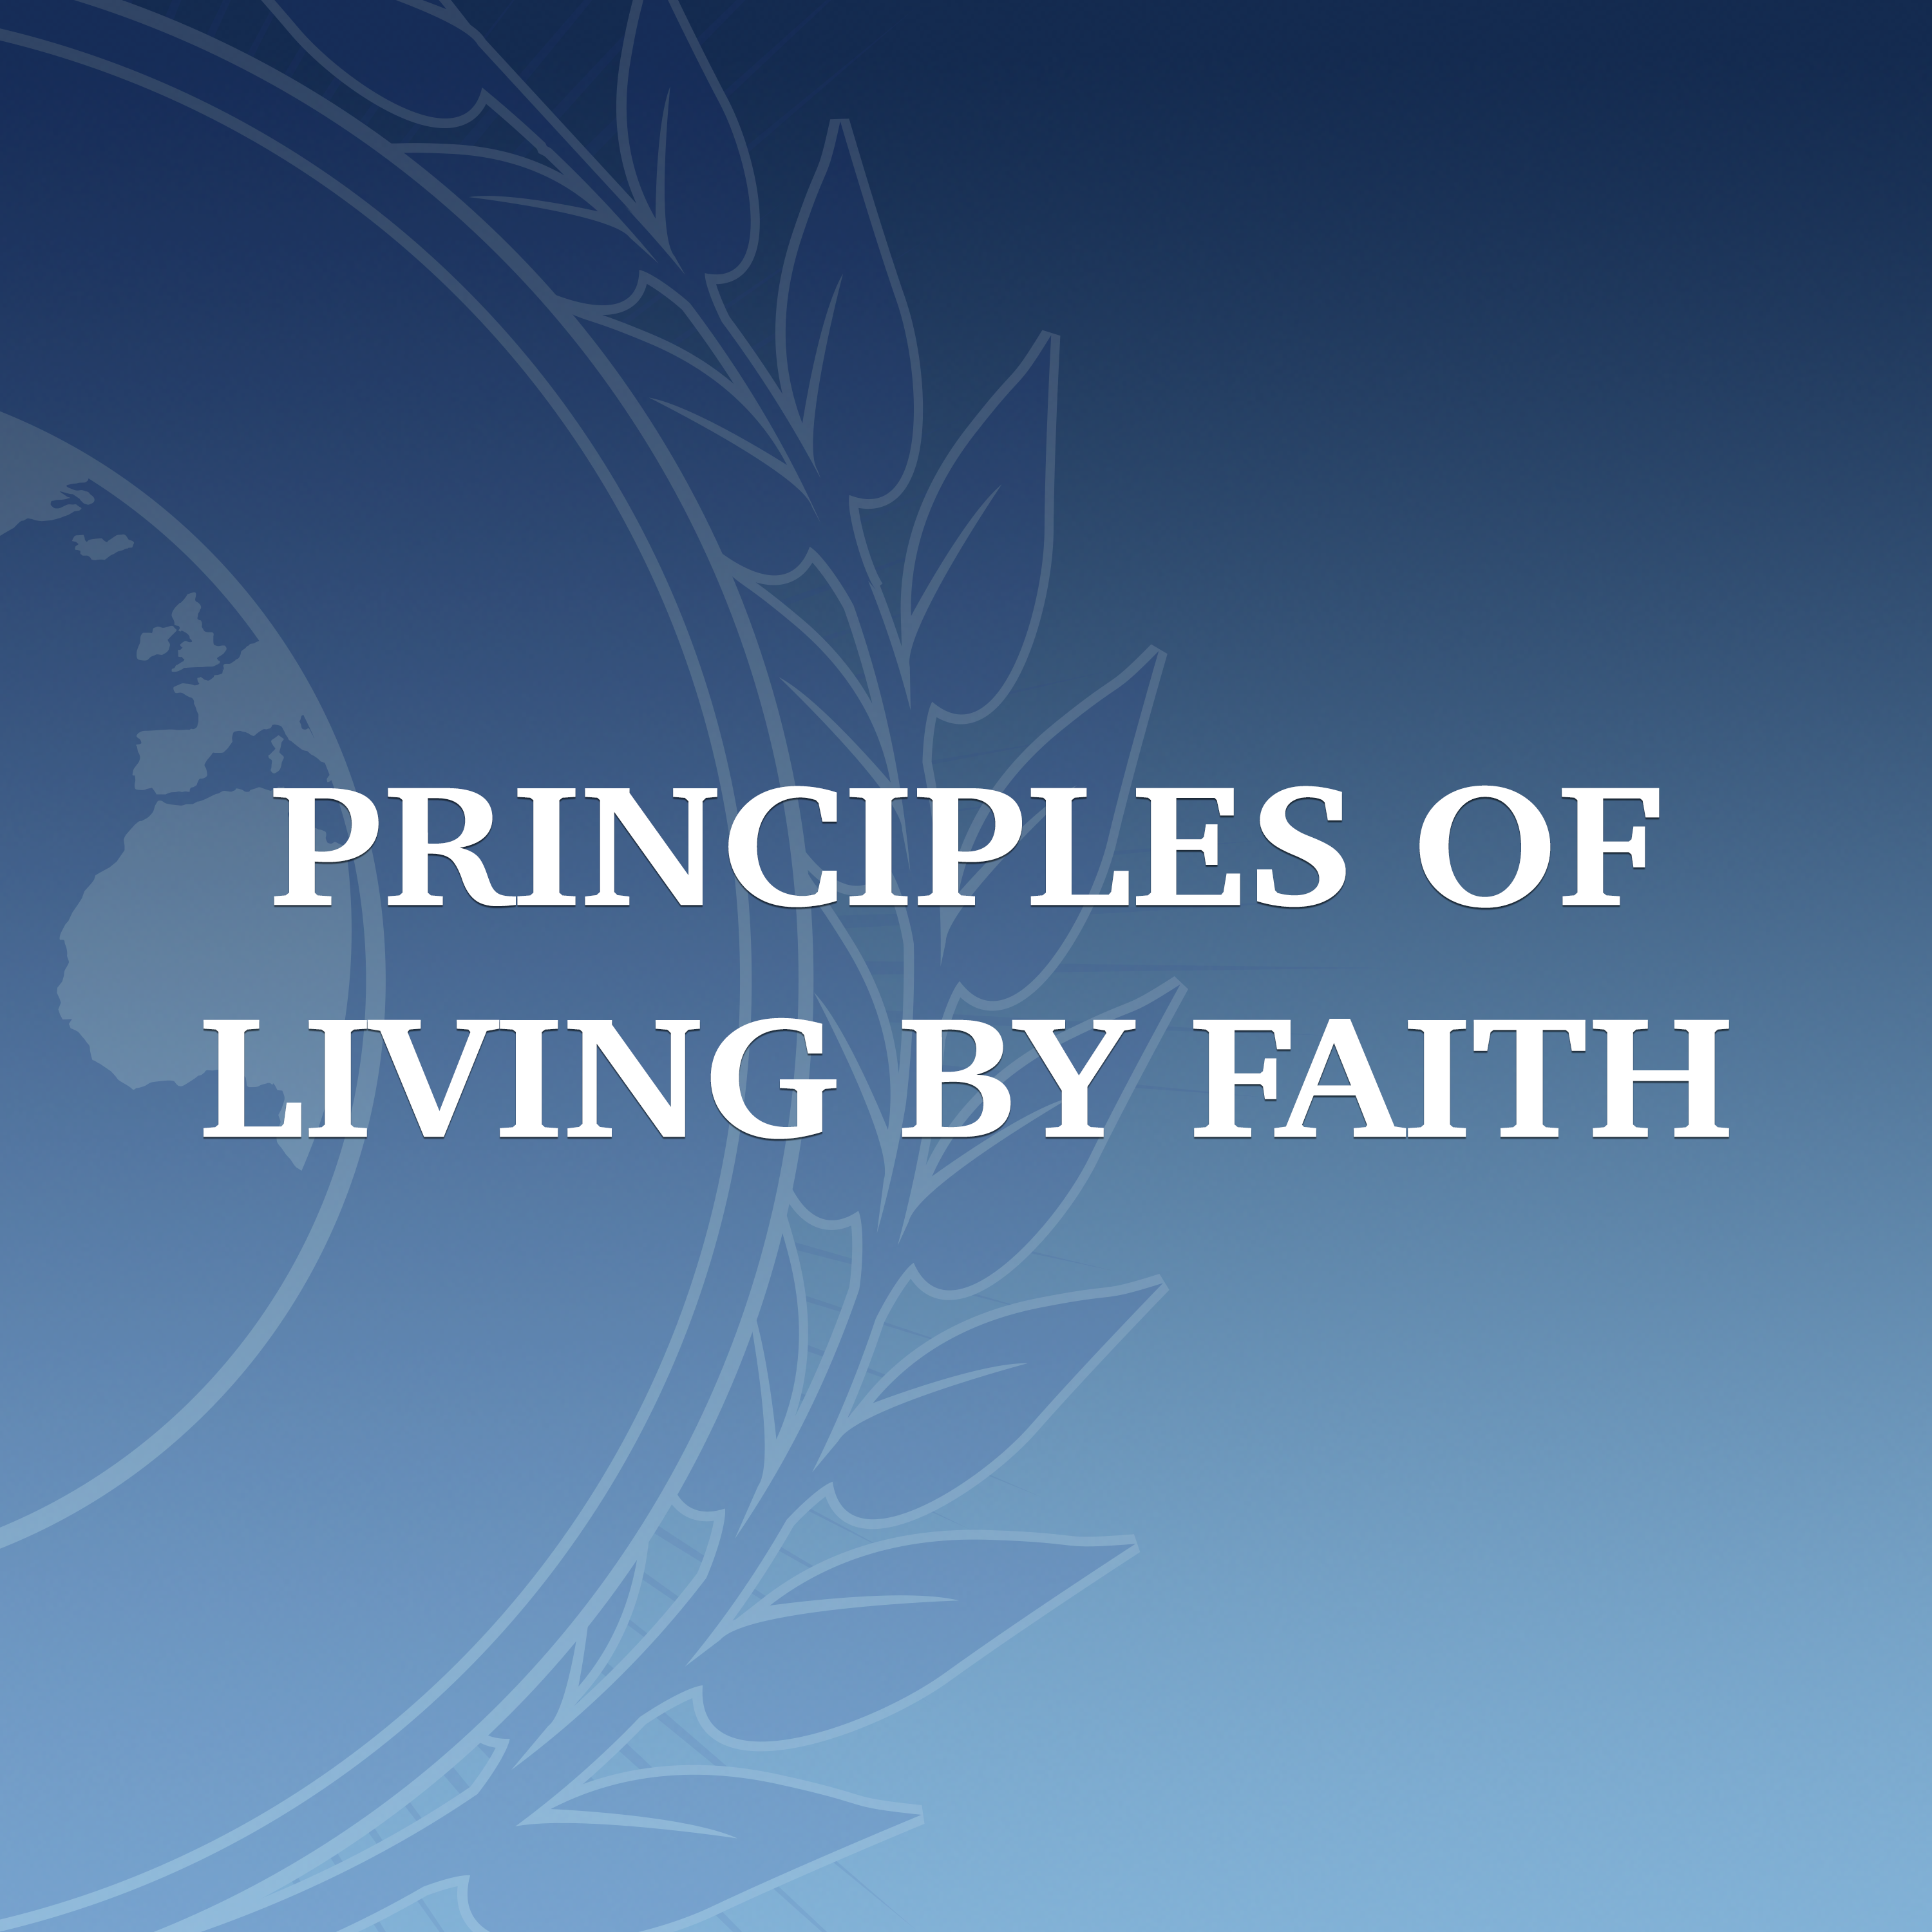 Featured image for “Principles of Living by Faith”